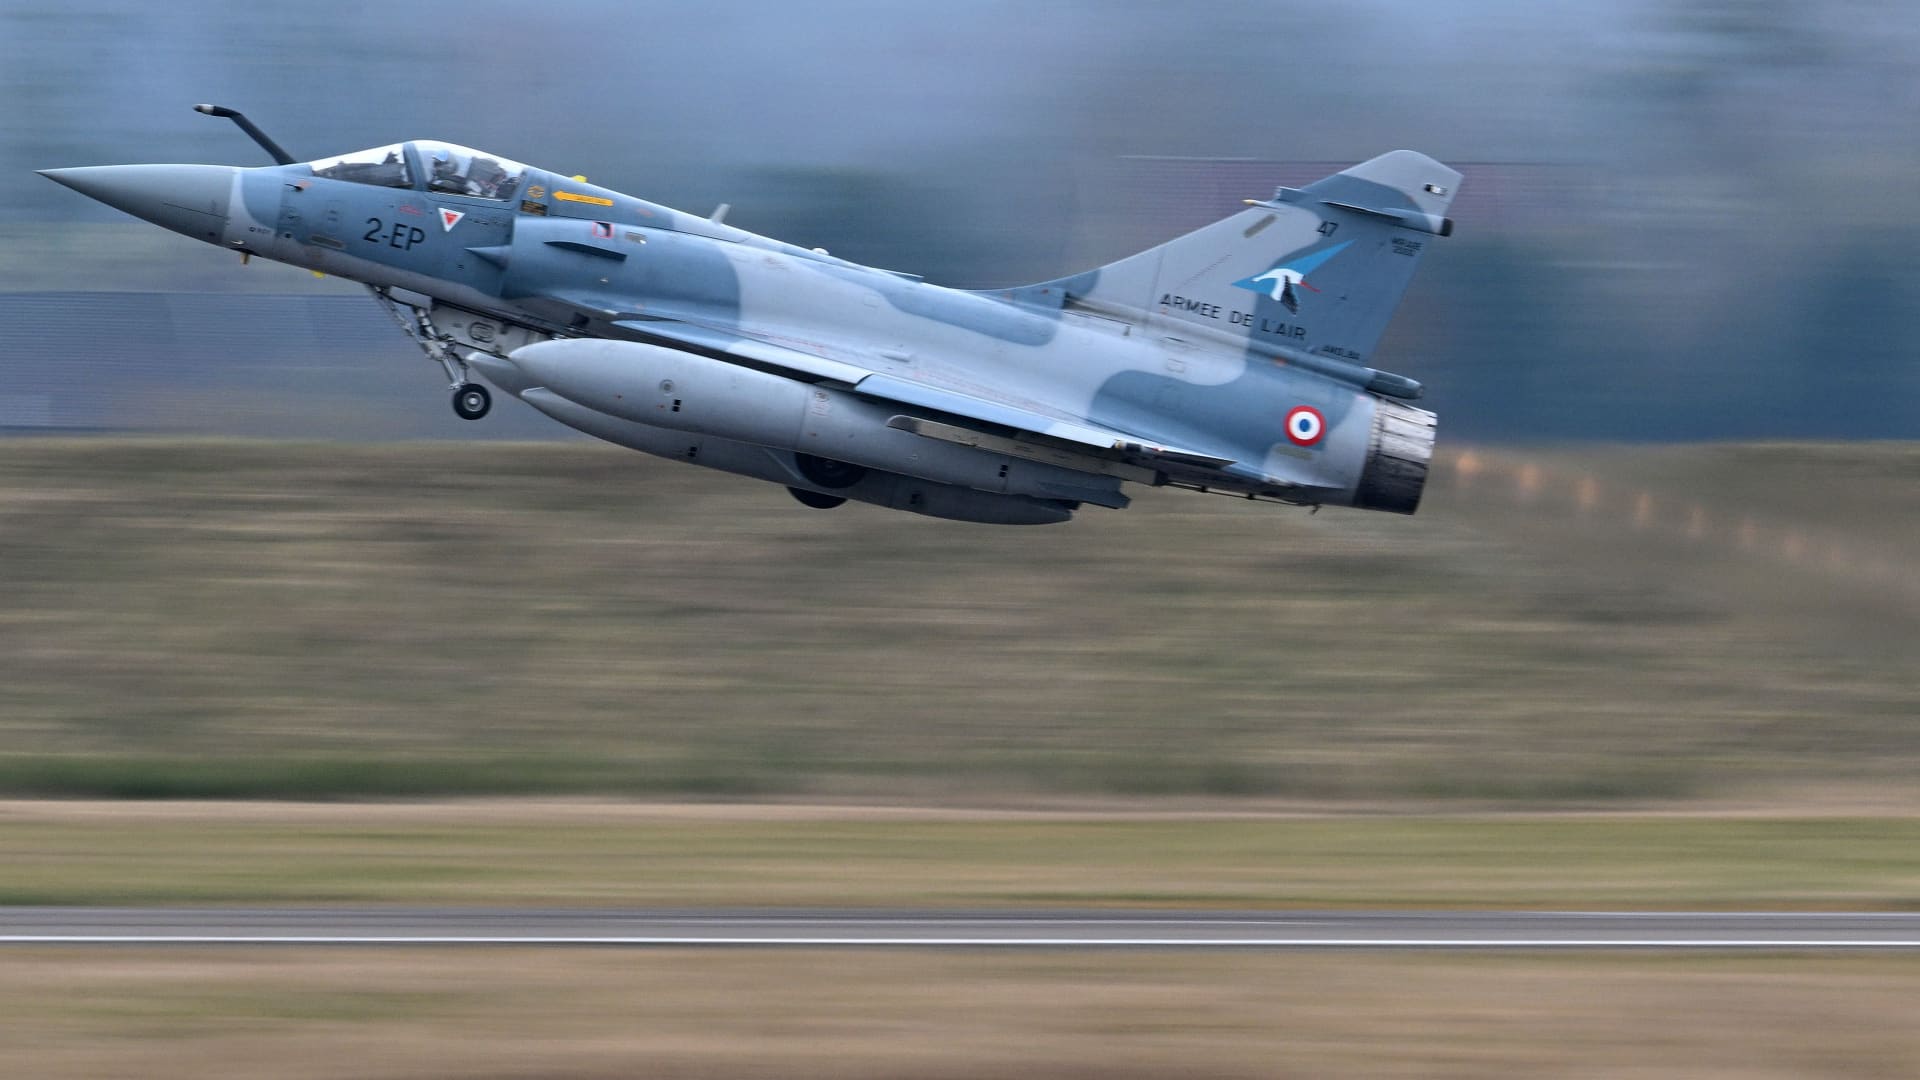 A Mirage 2000-5F jet fighter takes off from Luxeuil-Saint Sauveur air-base 116, in Saint-Sauveur, eastern France, on March 13, 2022.